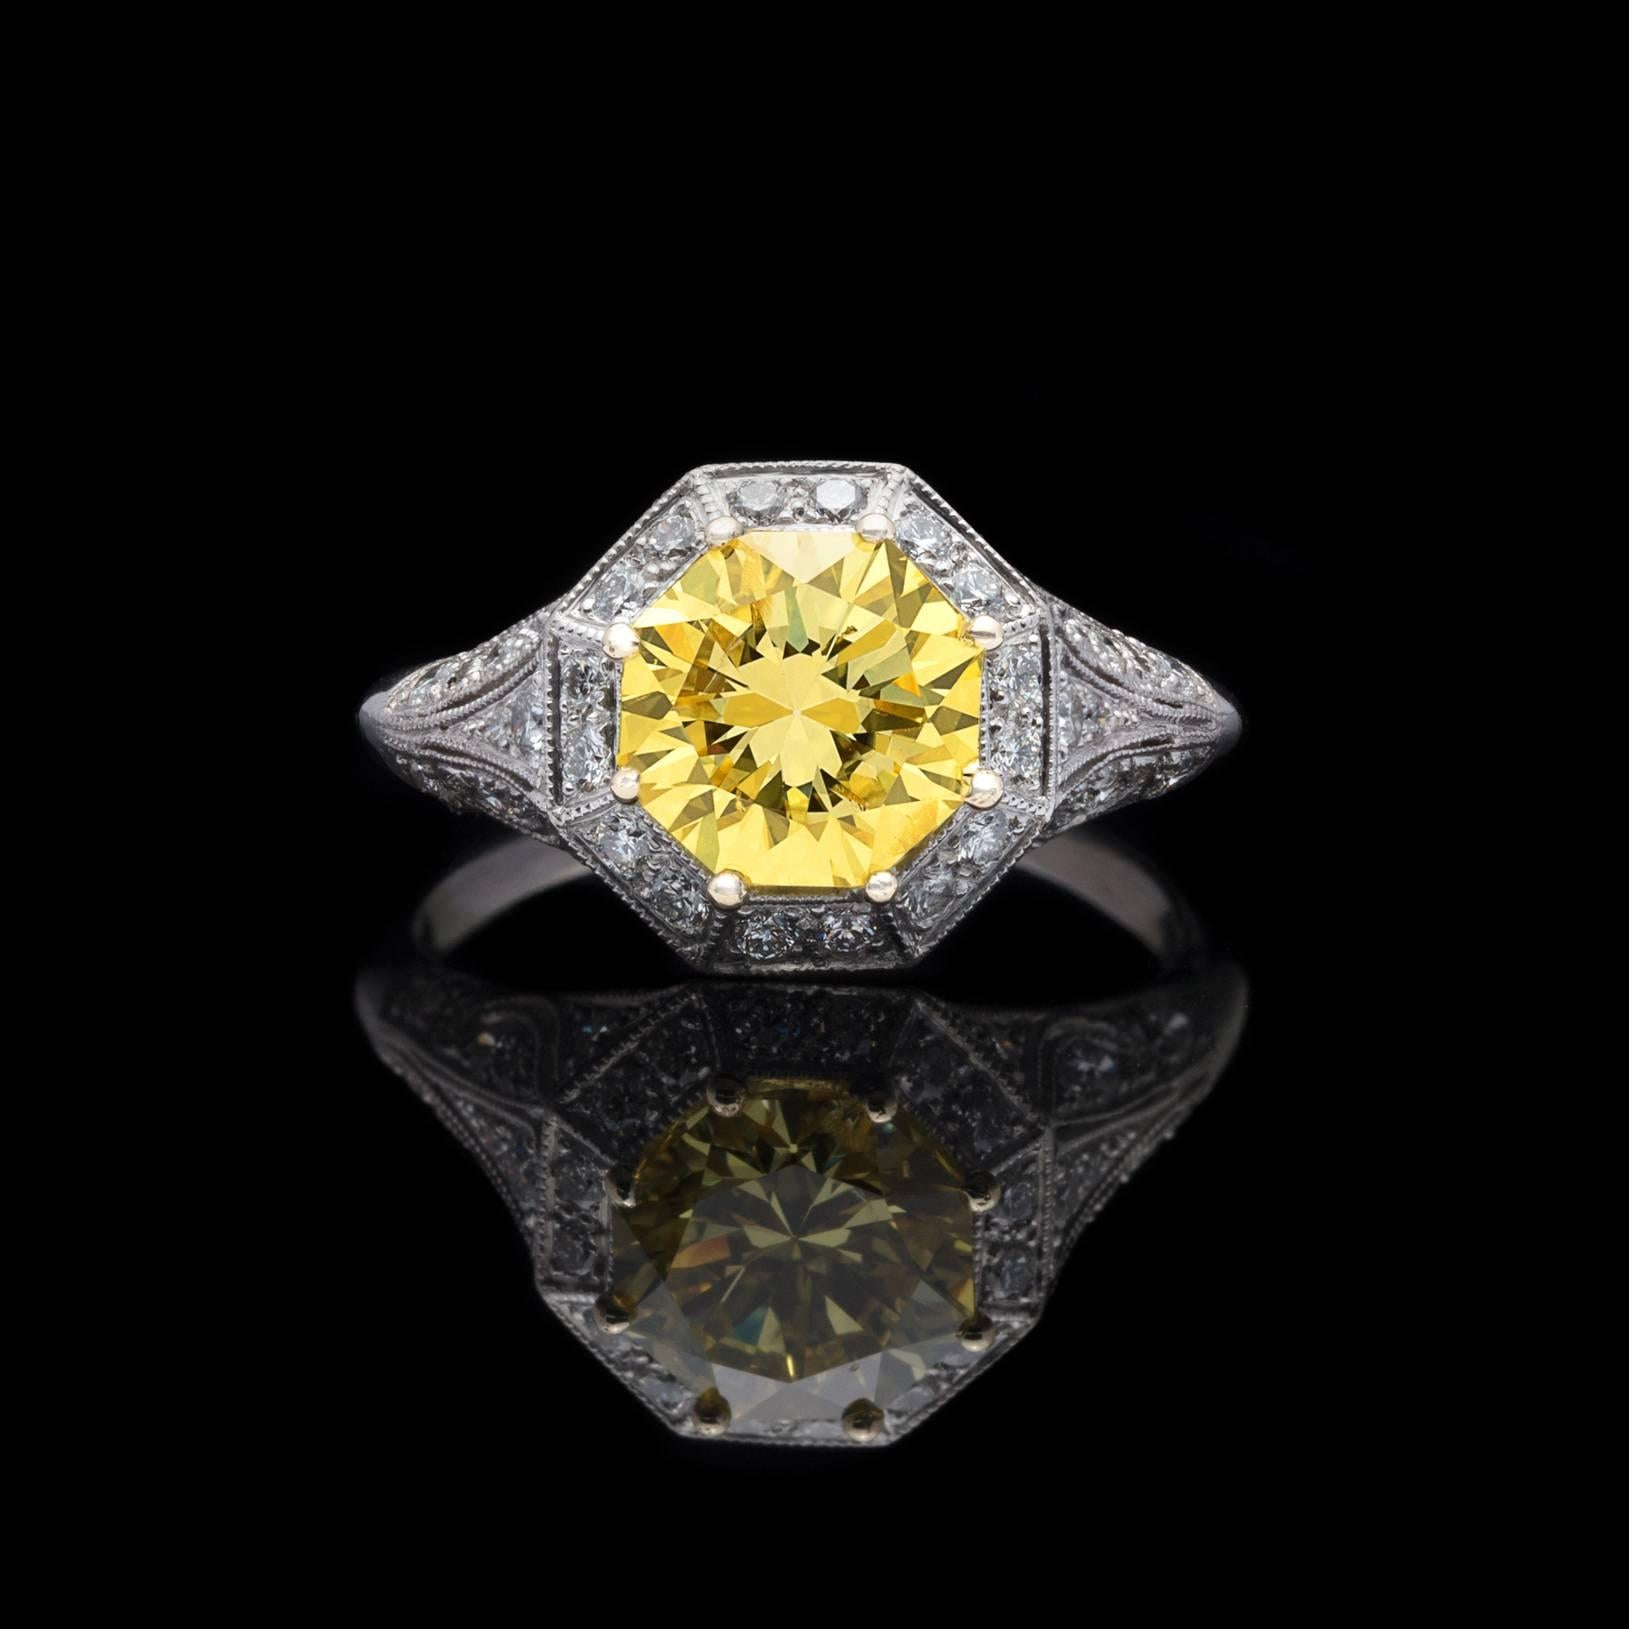 Art Deco Exceptional GIA Fancy Intense Yellow Diamond in French Platinum Ring